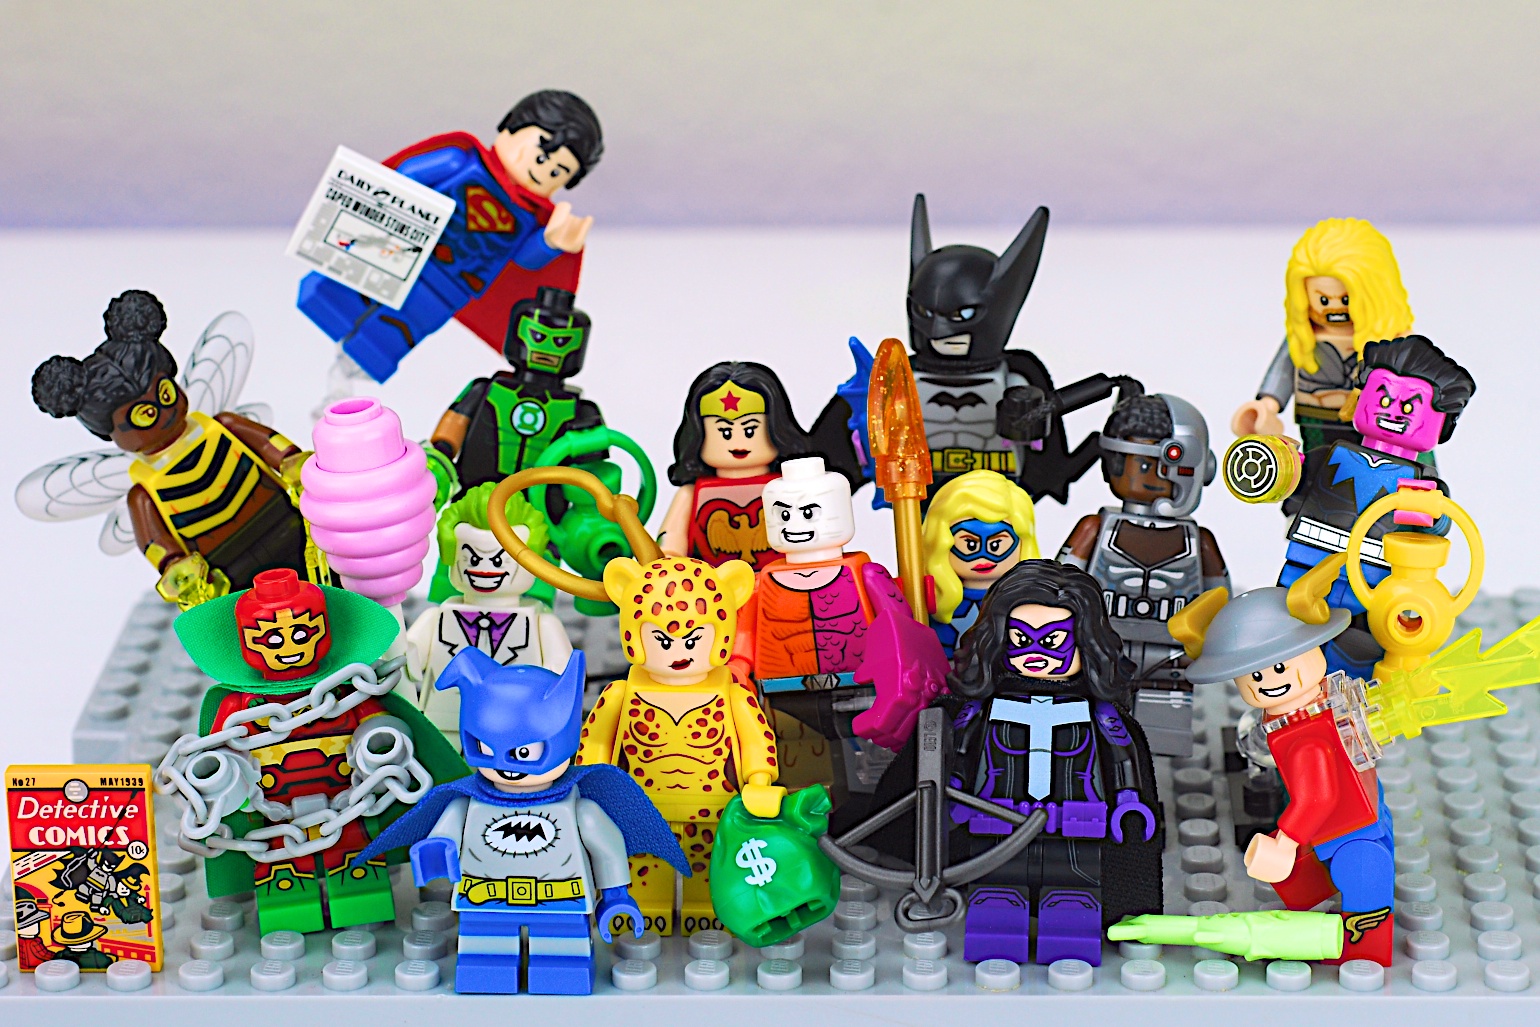 The Ultimate Guide to Collecting LEGO DC Comics Minifigures and Sets